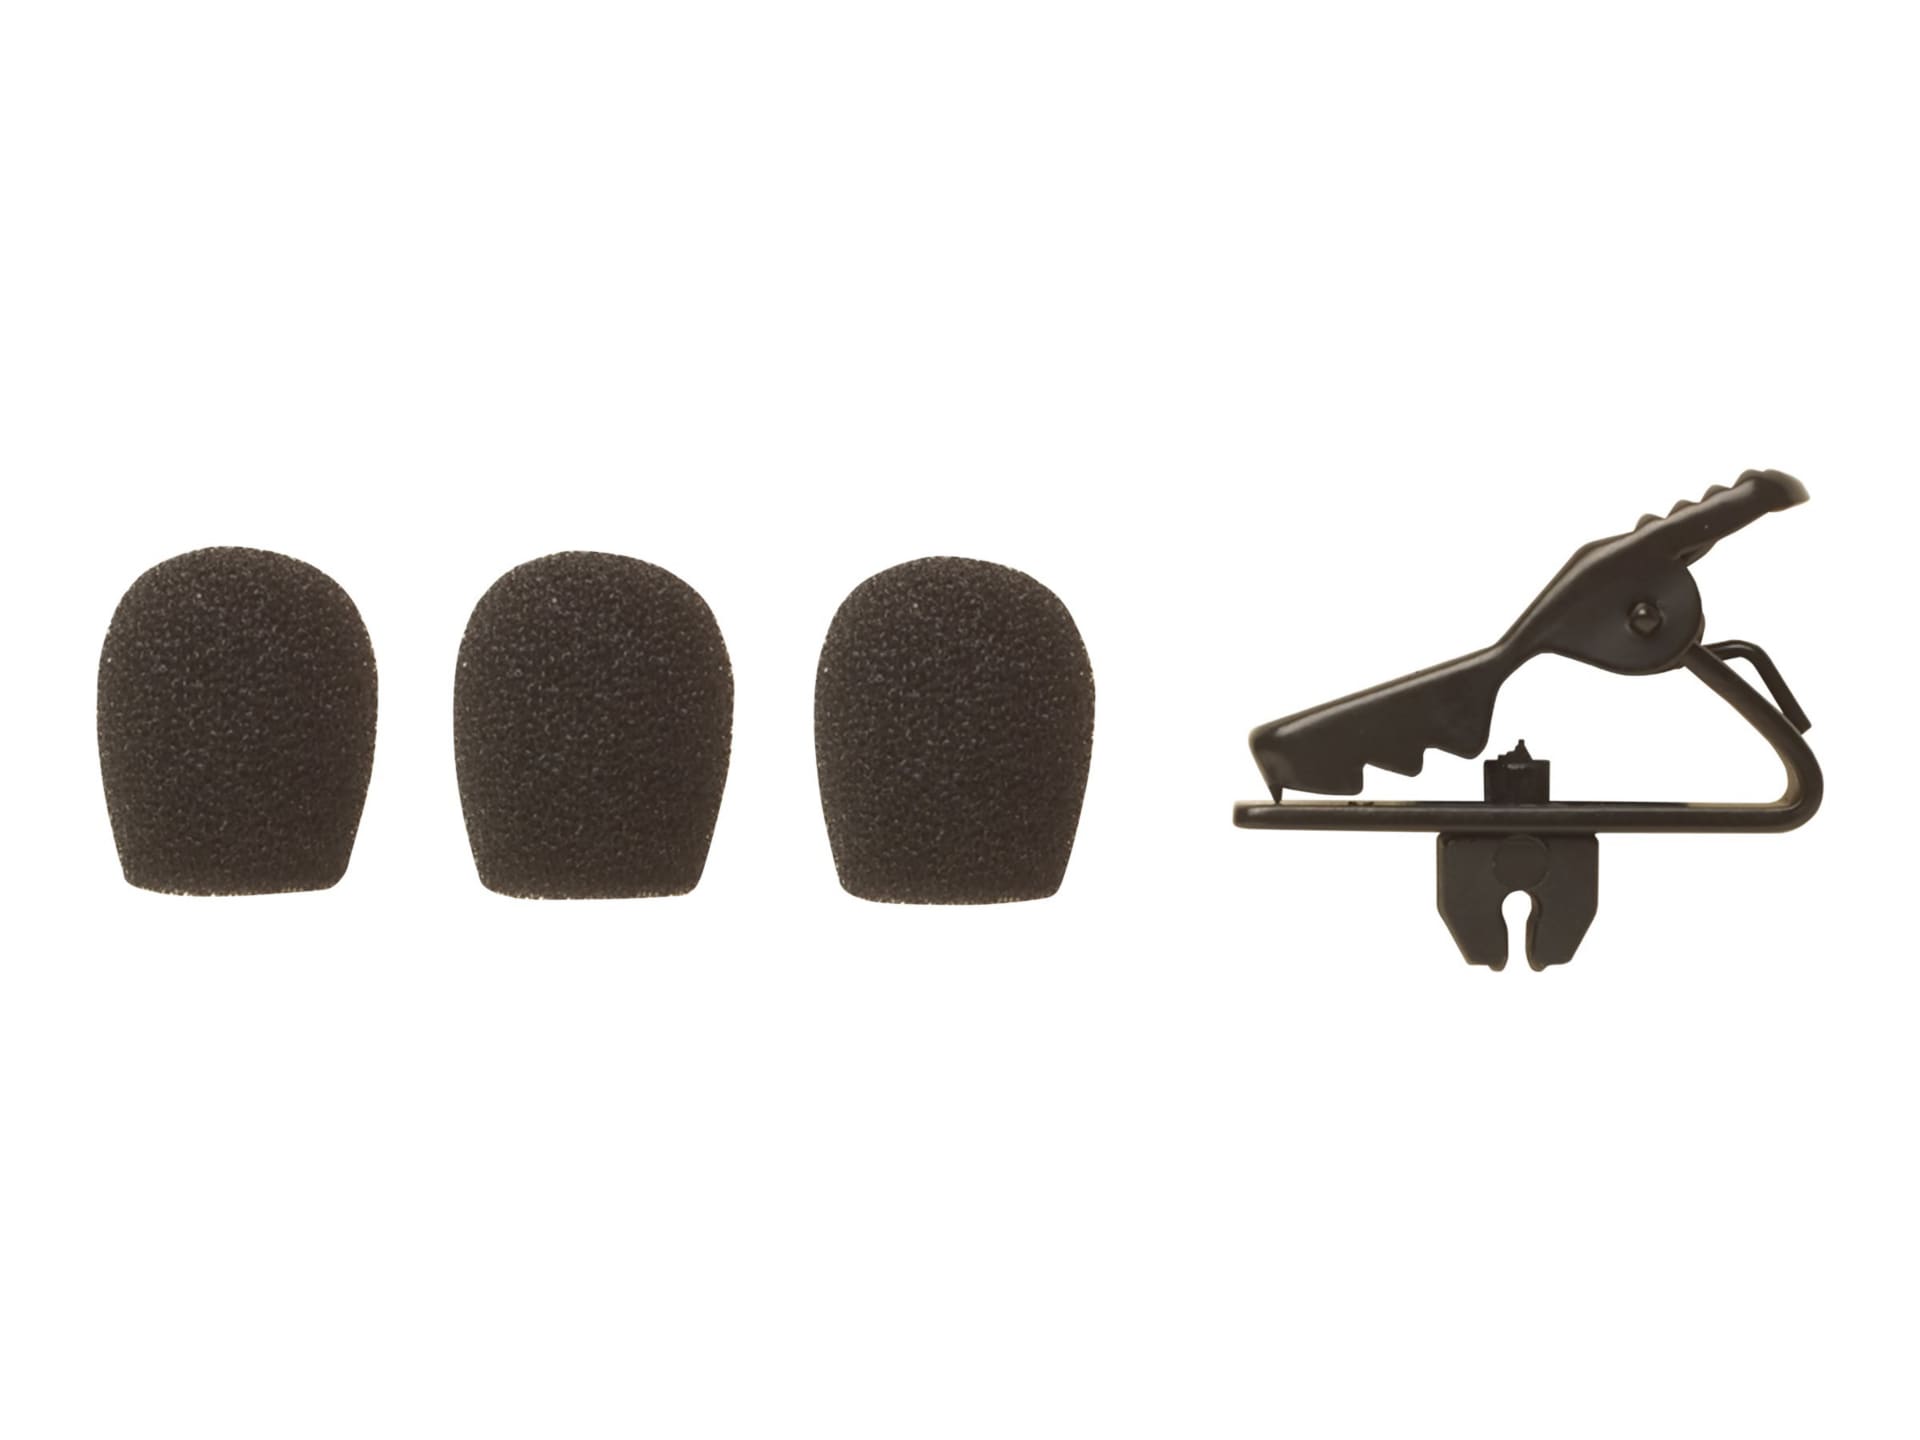 Shure RPM153B - accessory kit for microphone